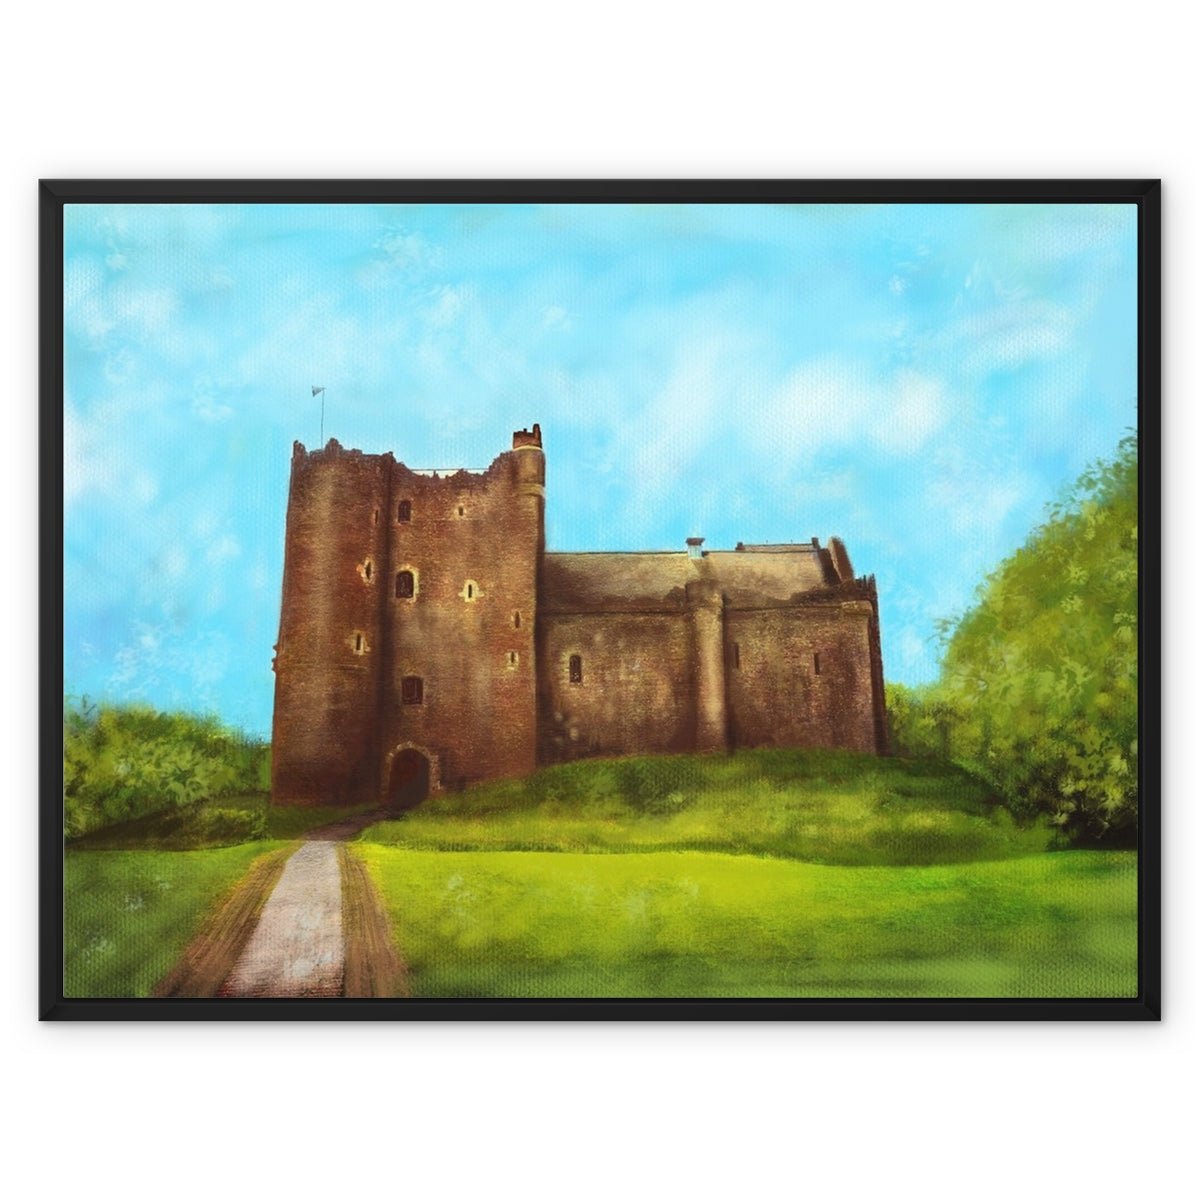 Doune Castle Painting | Framed Canvas From Scotland-Floating Framed Canvas Prints-Historic & Iconic Scotland Art Gallery-32"x24"-Black Frame-Paintings, Prints, Homeware, Art Gifts From Scotland By Scottish Artist Kevin Hunter